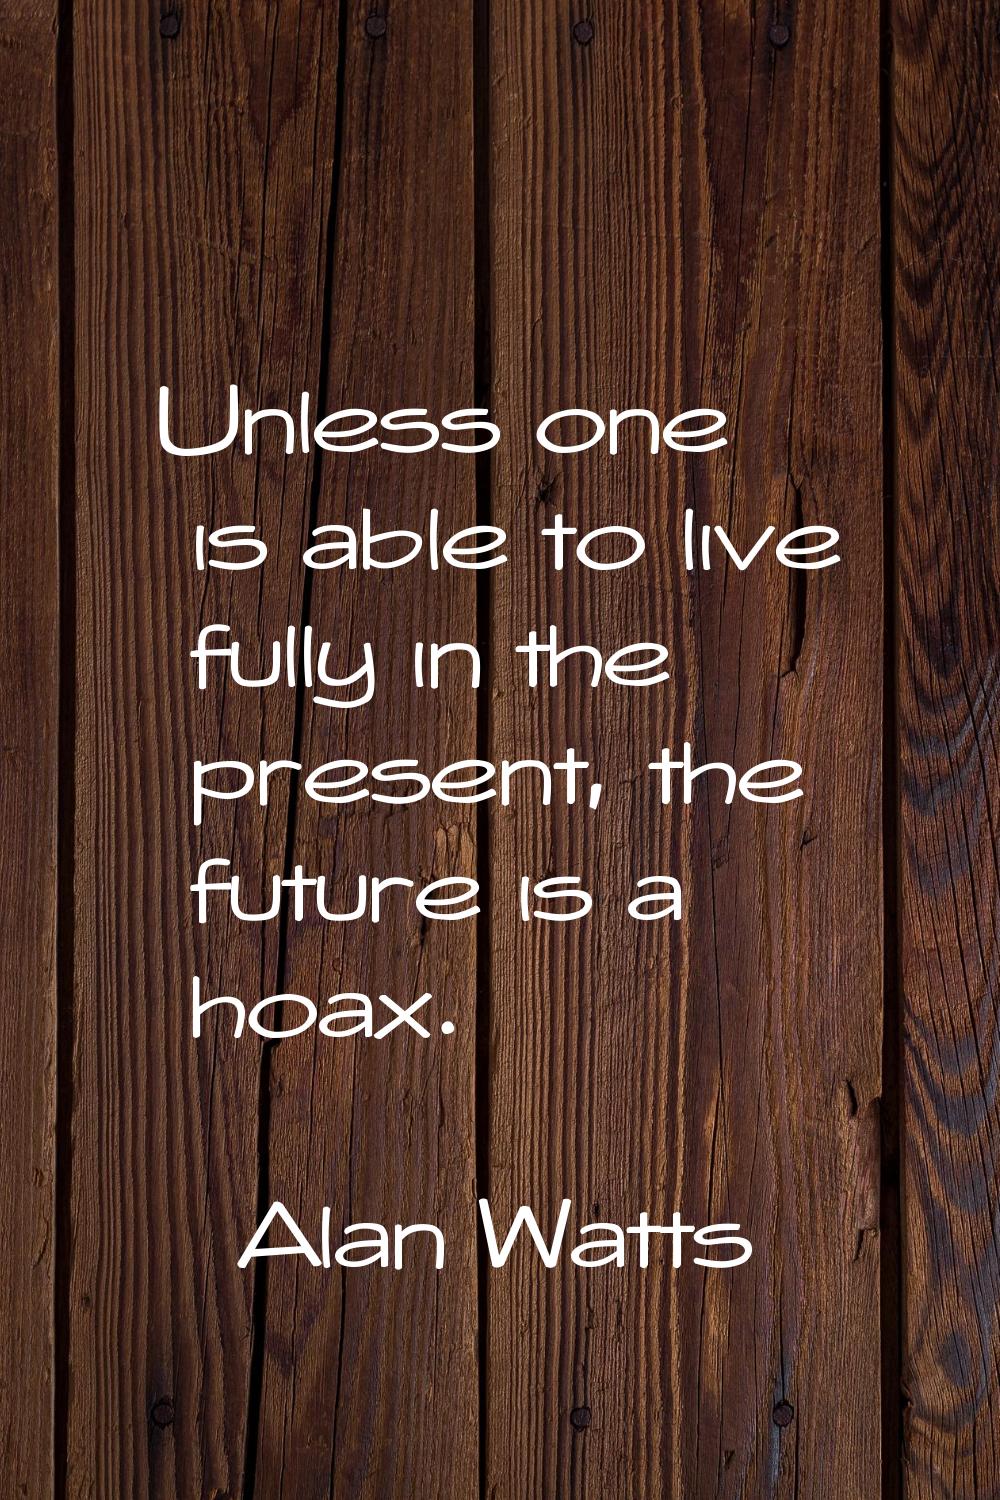 Unless one is able to live fully in the present, the future is a hoax.